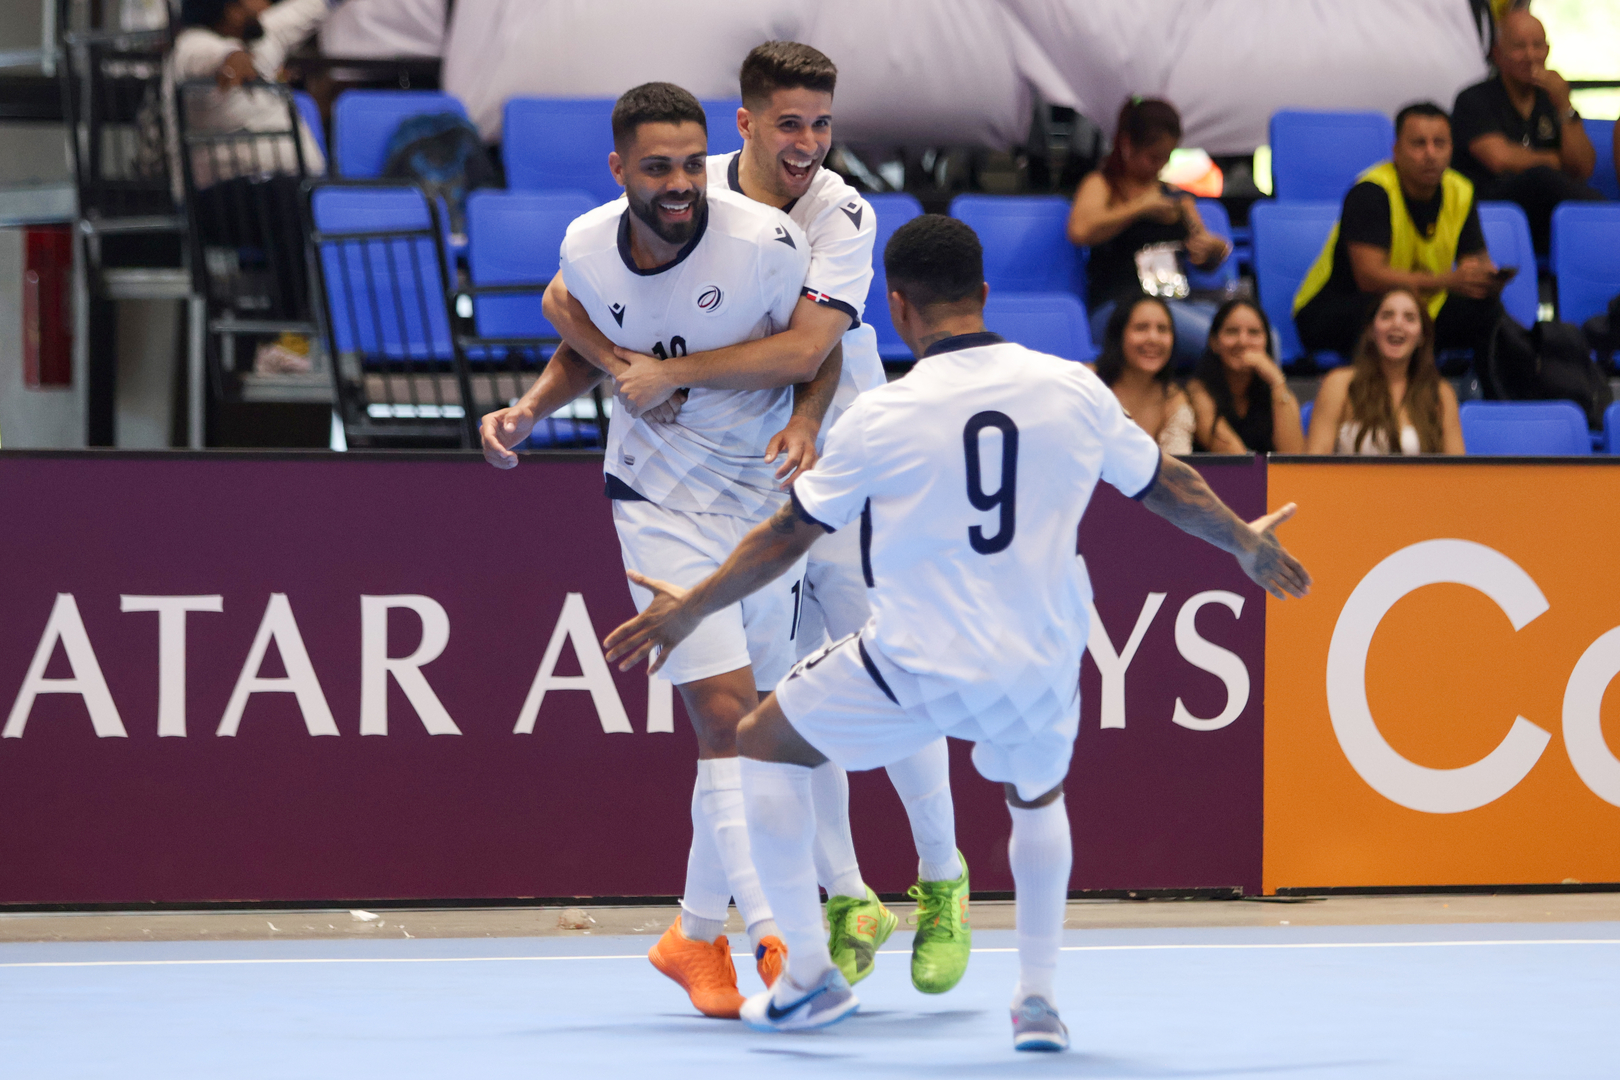 T&T get trampled 11-1 by Dominican Republic in Concacaf Futsal action